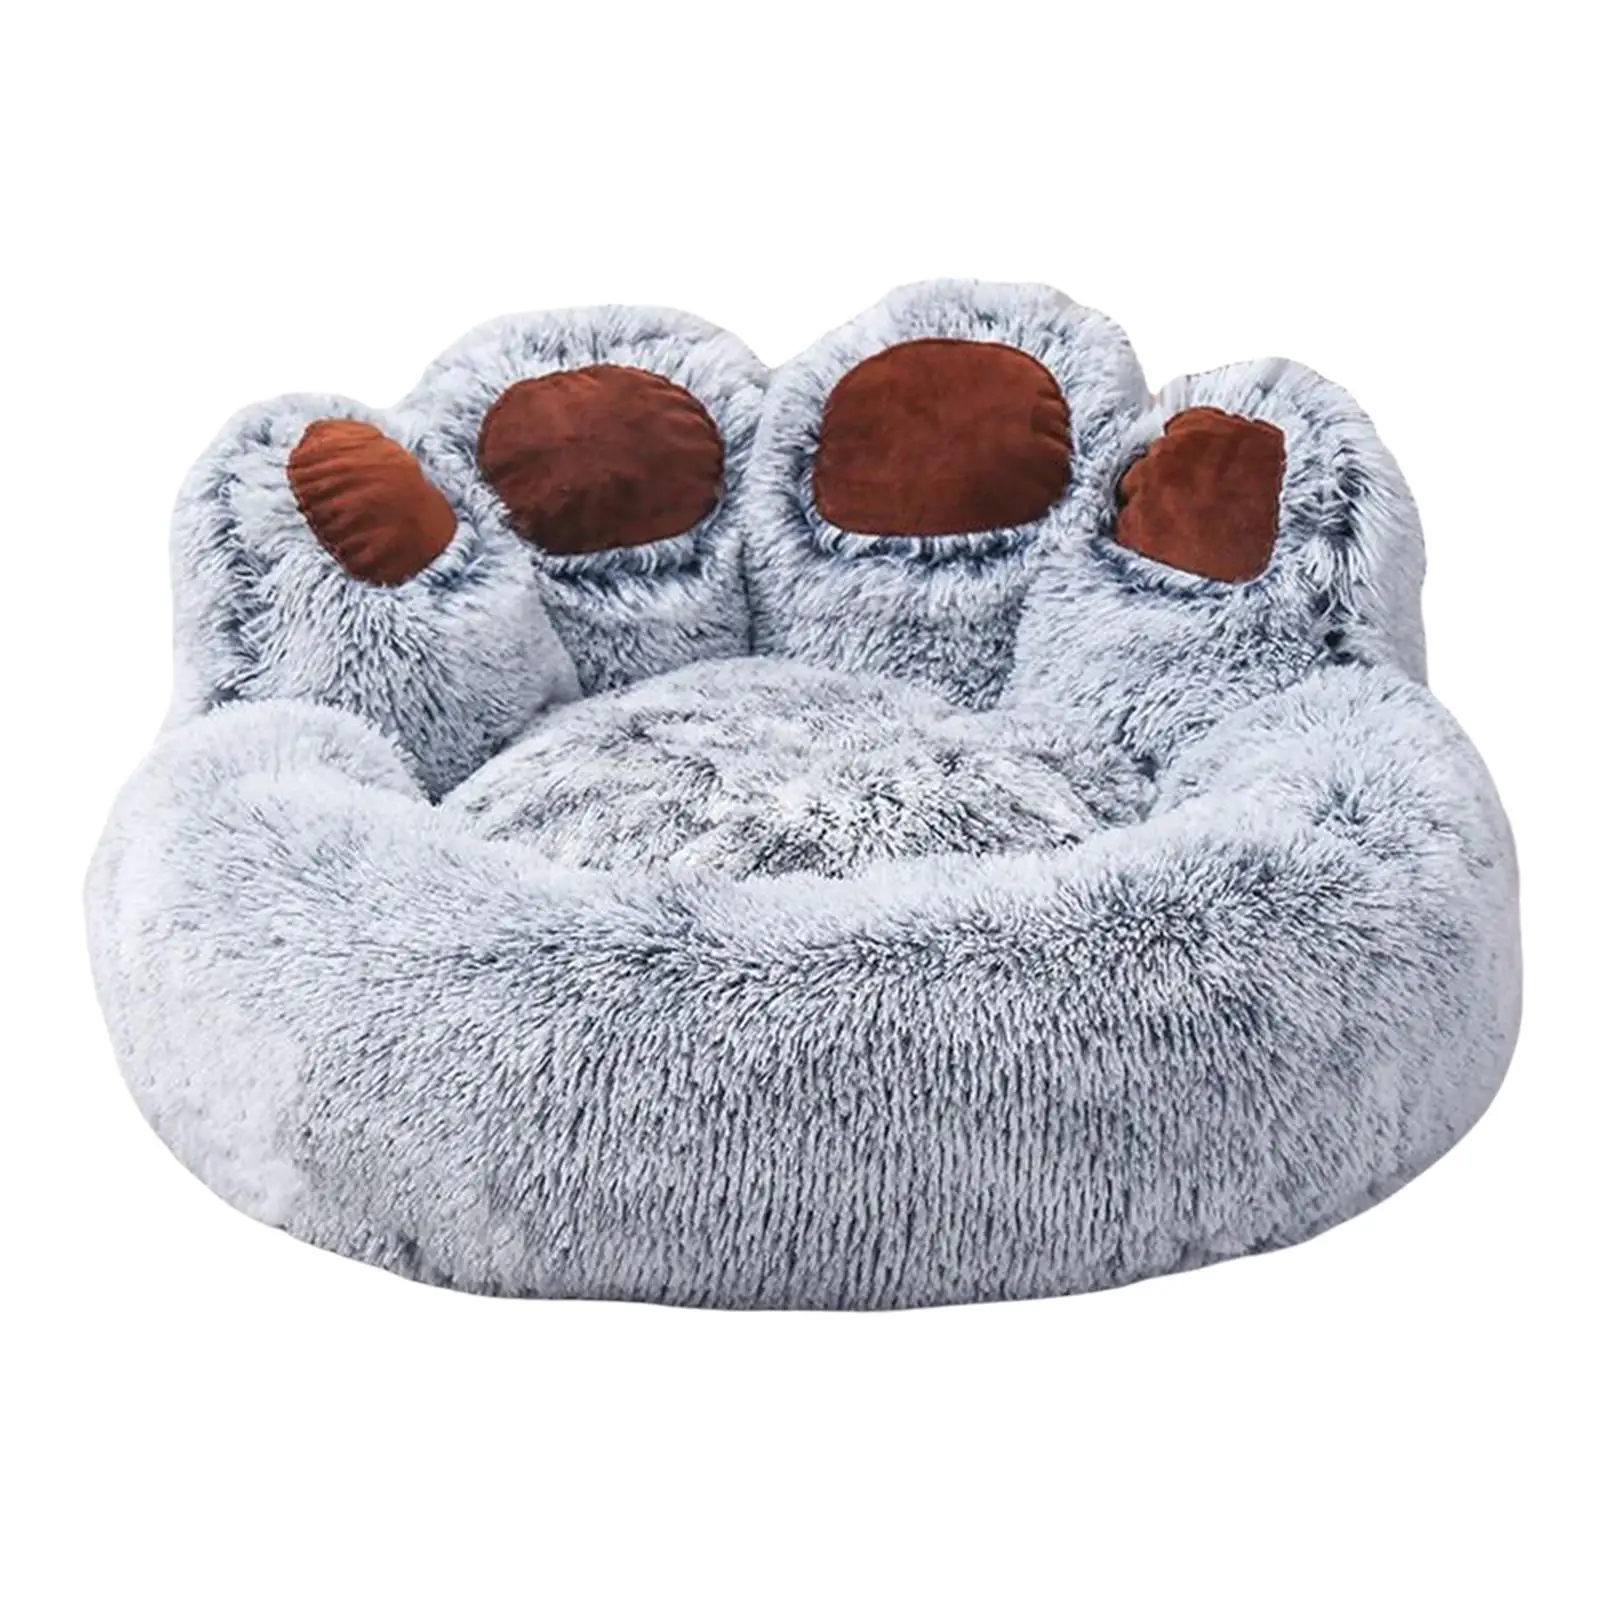 Warm House Dog Bed for Cats, Non-Slip Bottom, Hand Or Machine Washable, Soothing